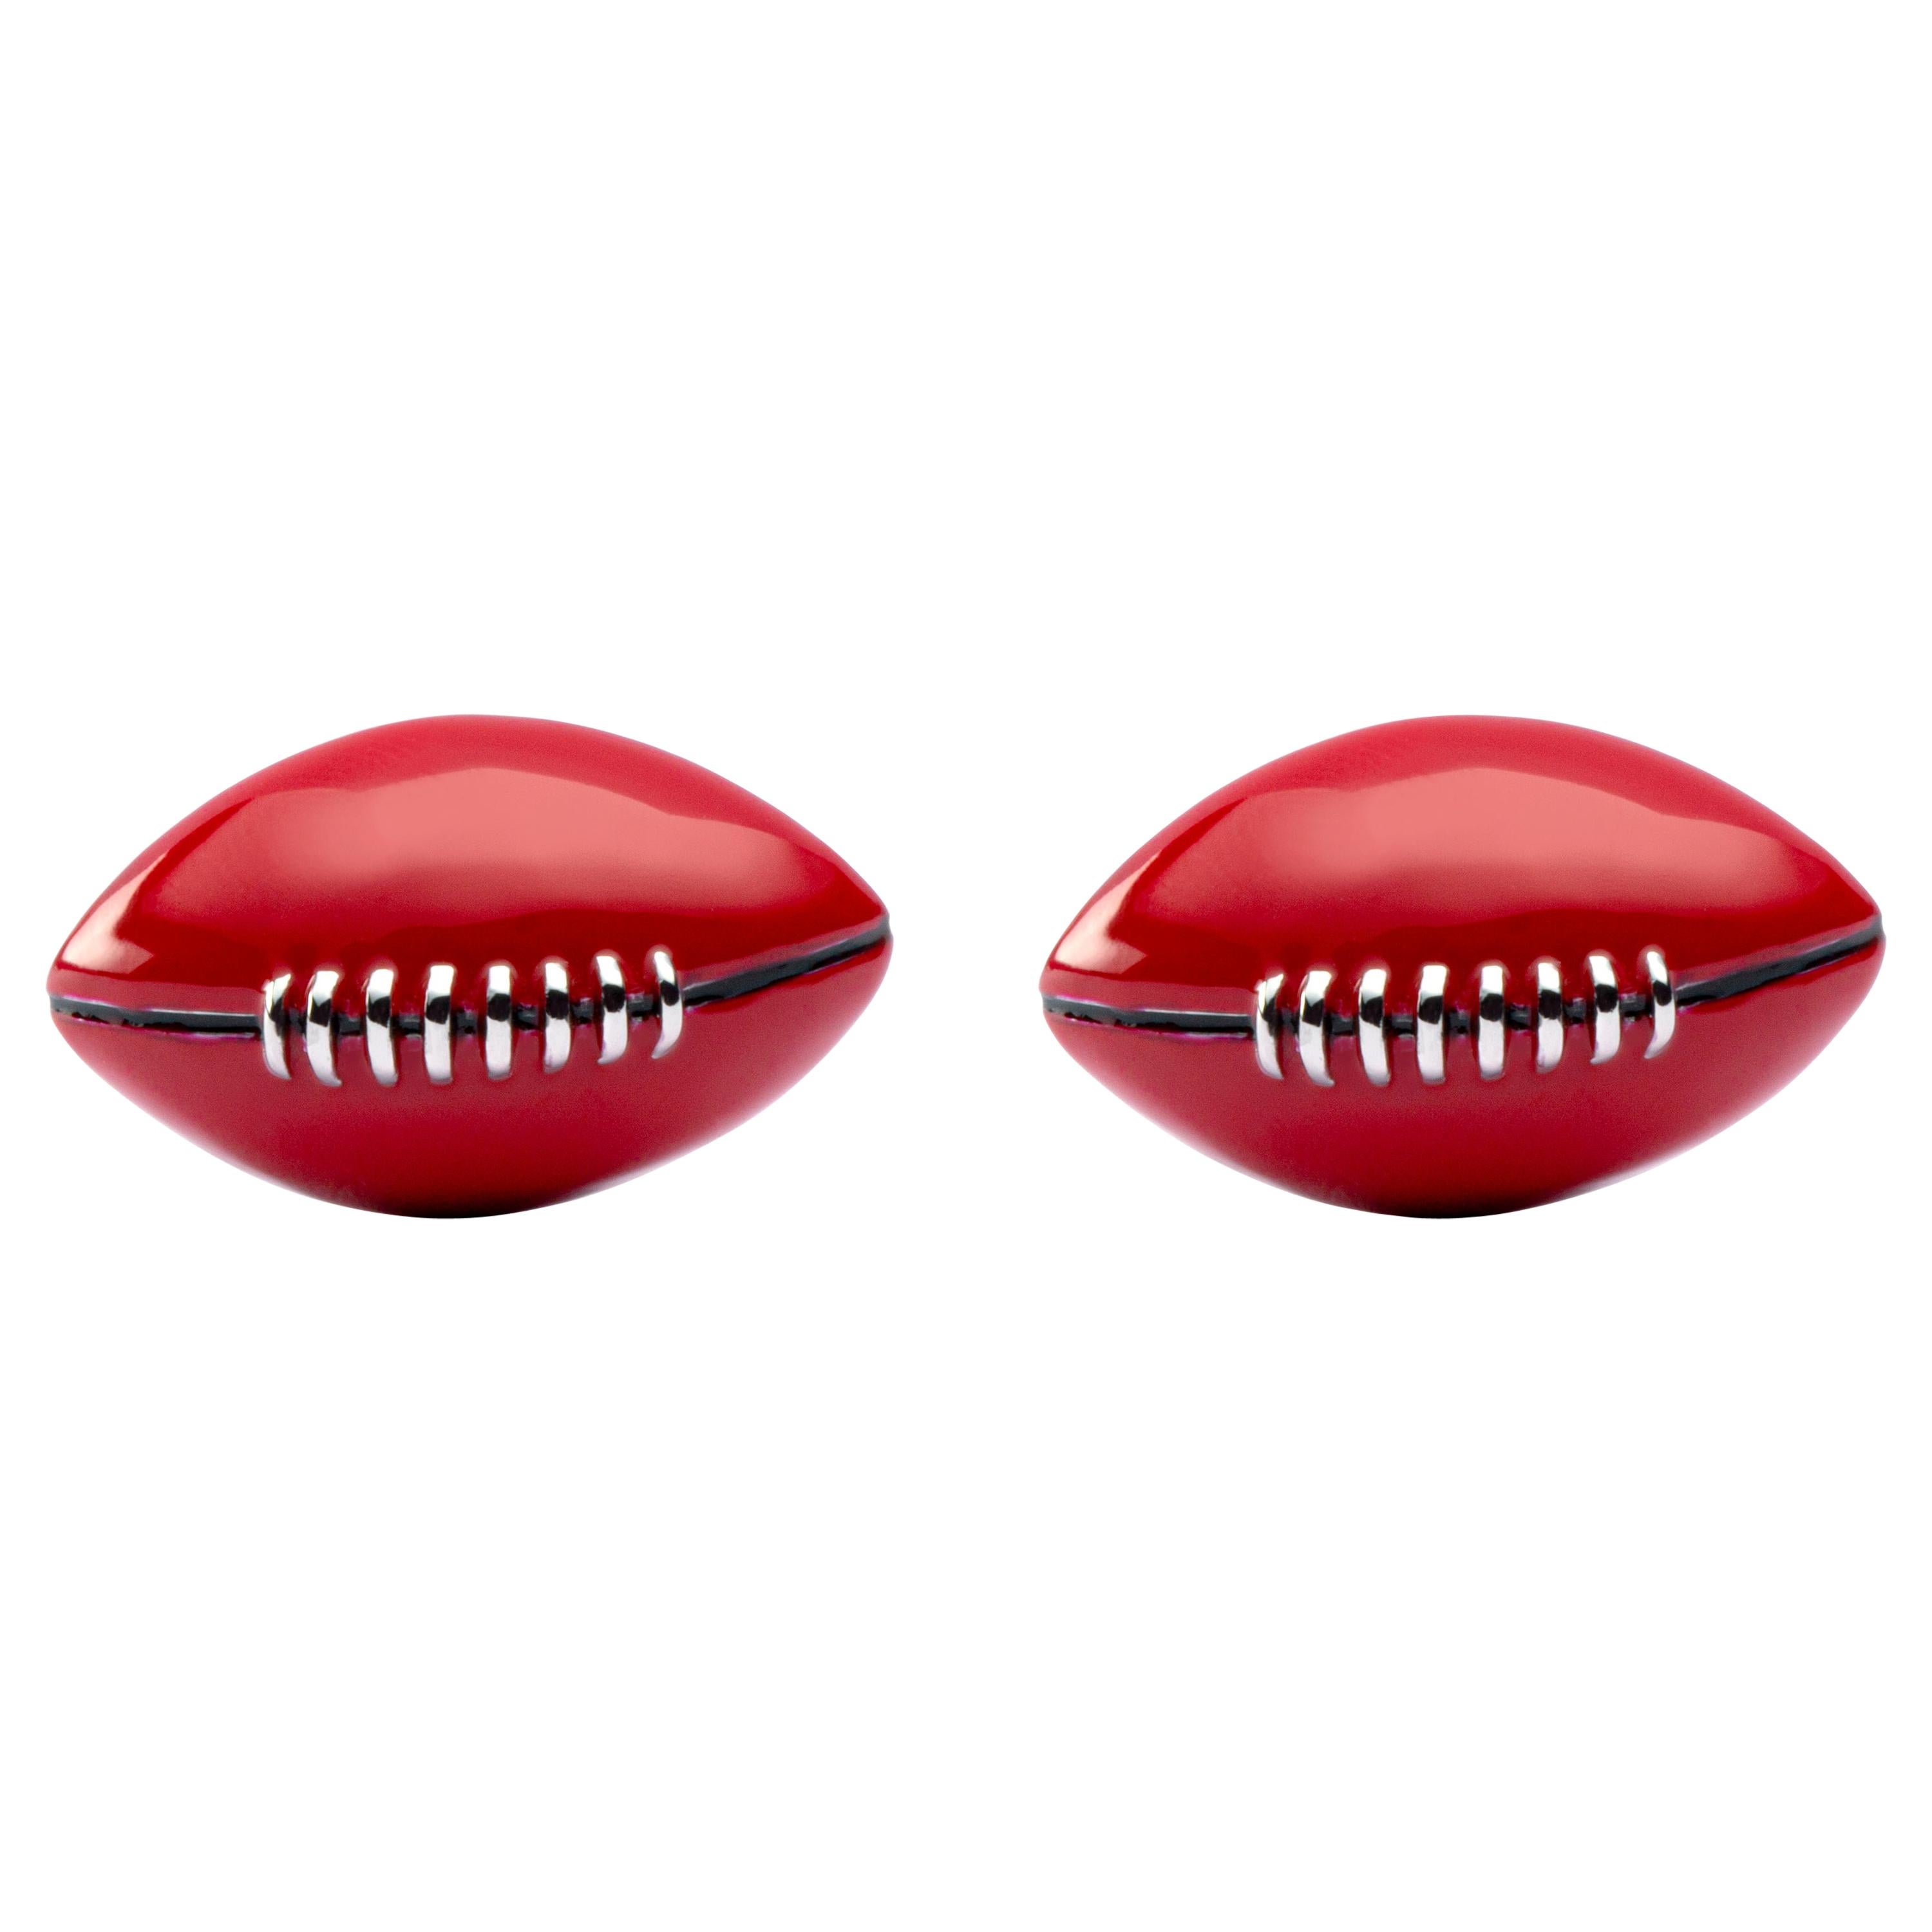 Jona Sterling Silver and Red Enamel Rugby Ball Cufflinks